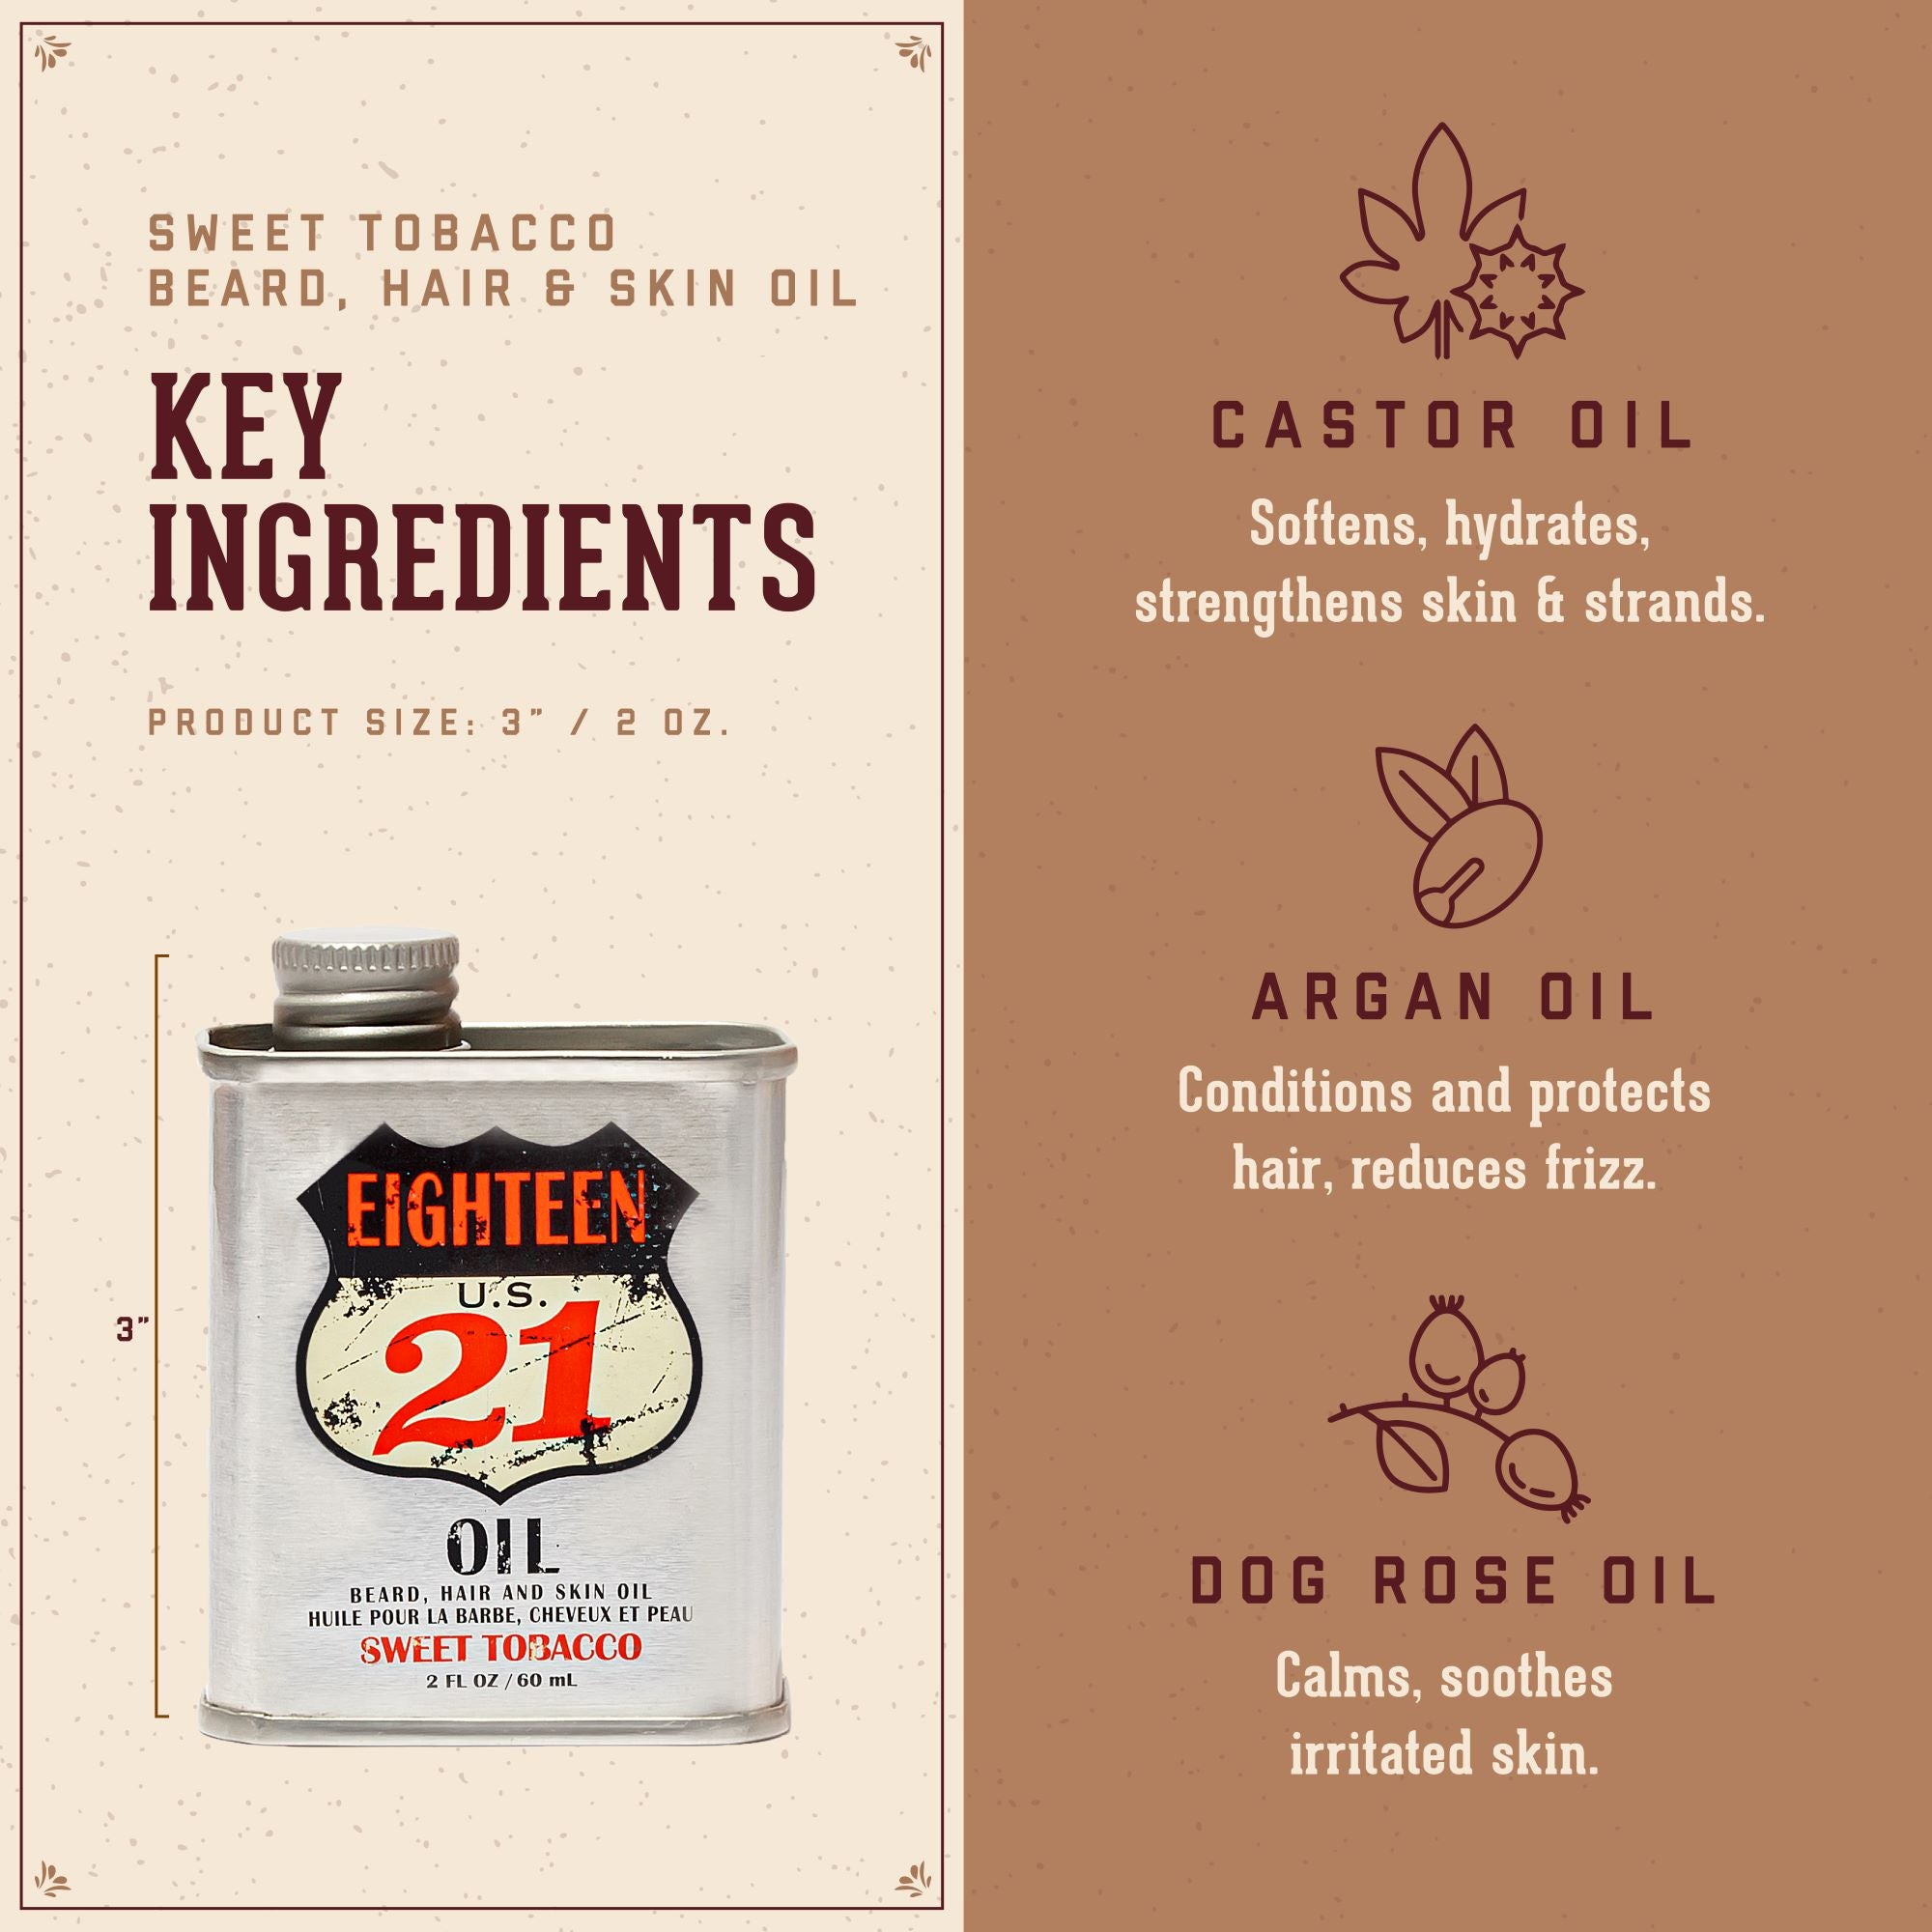 18.21 Man Made  Oil key ingredients. Castor Oil: softens, hydrates, strengthens skin & strands. Argan Oil: conditions and protects hair, reduces frizz. Dog Rose Oil: calms, and soothes irritated skin.